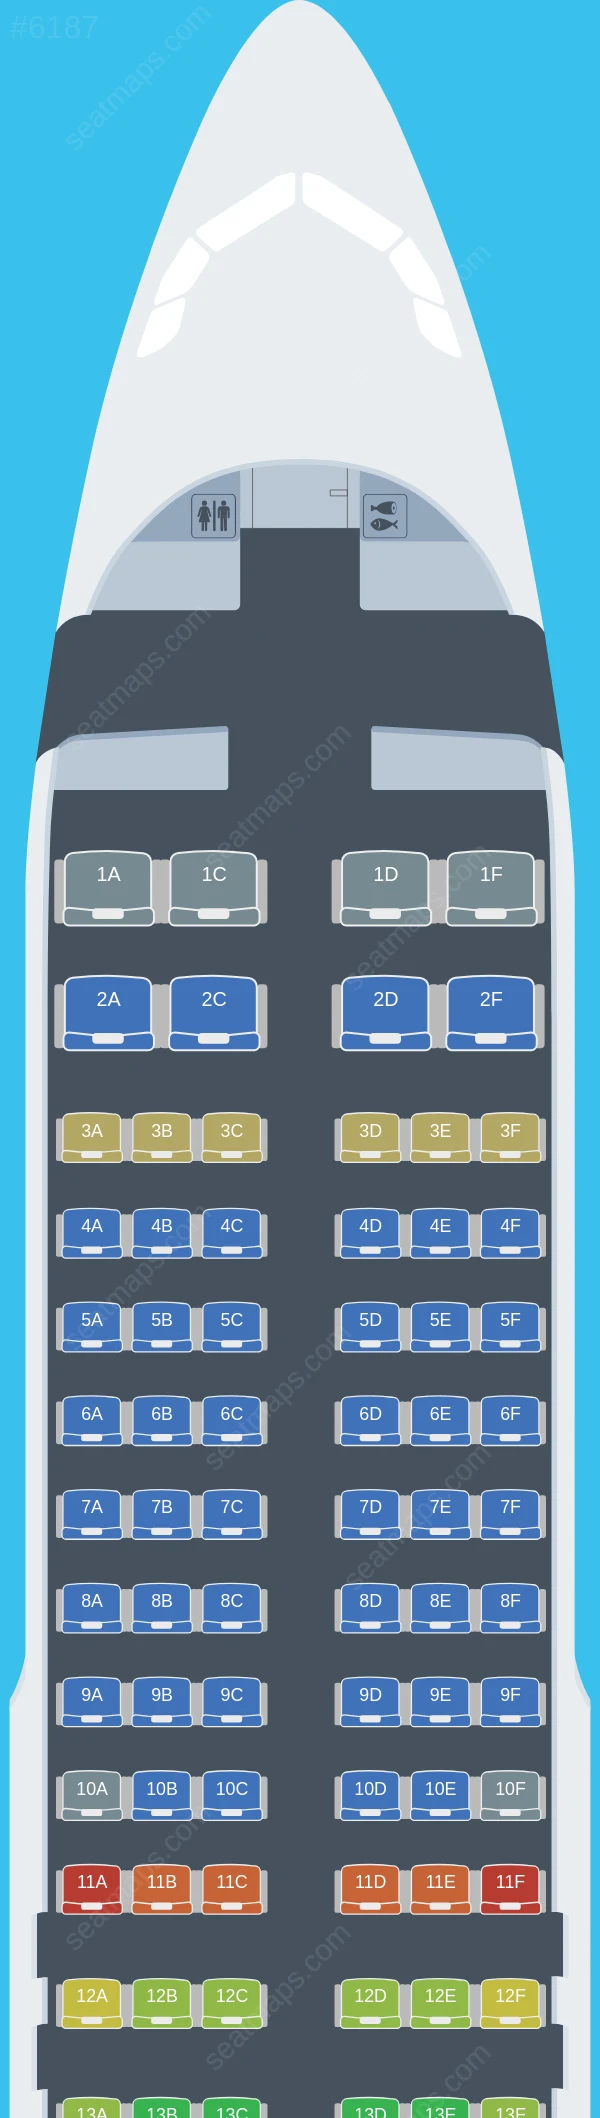 Spirit Airlines Airbus A320-200 seatmap preview